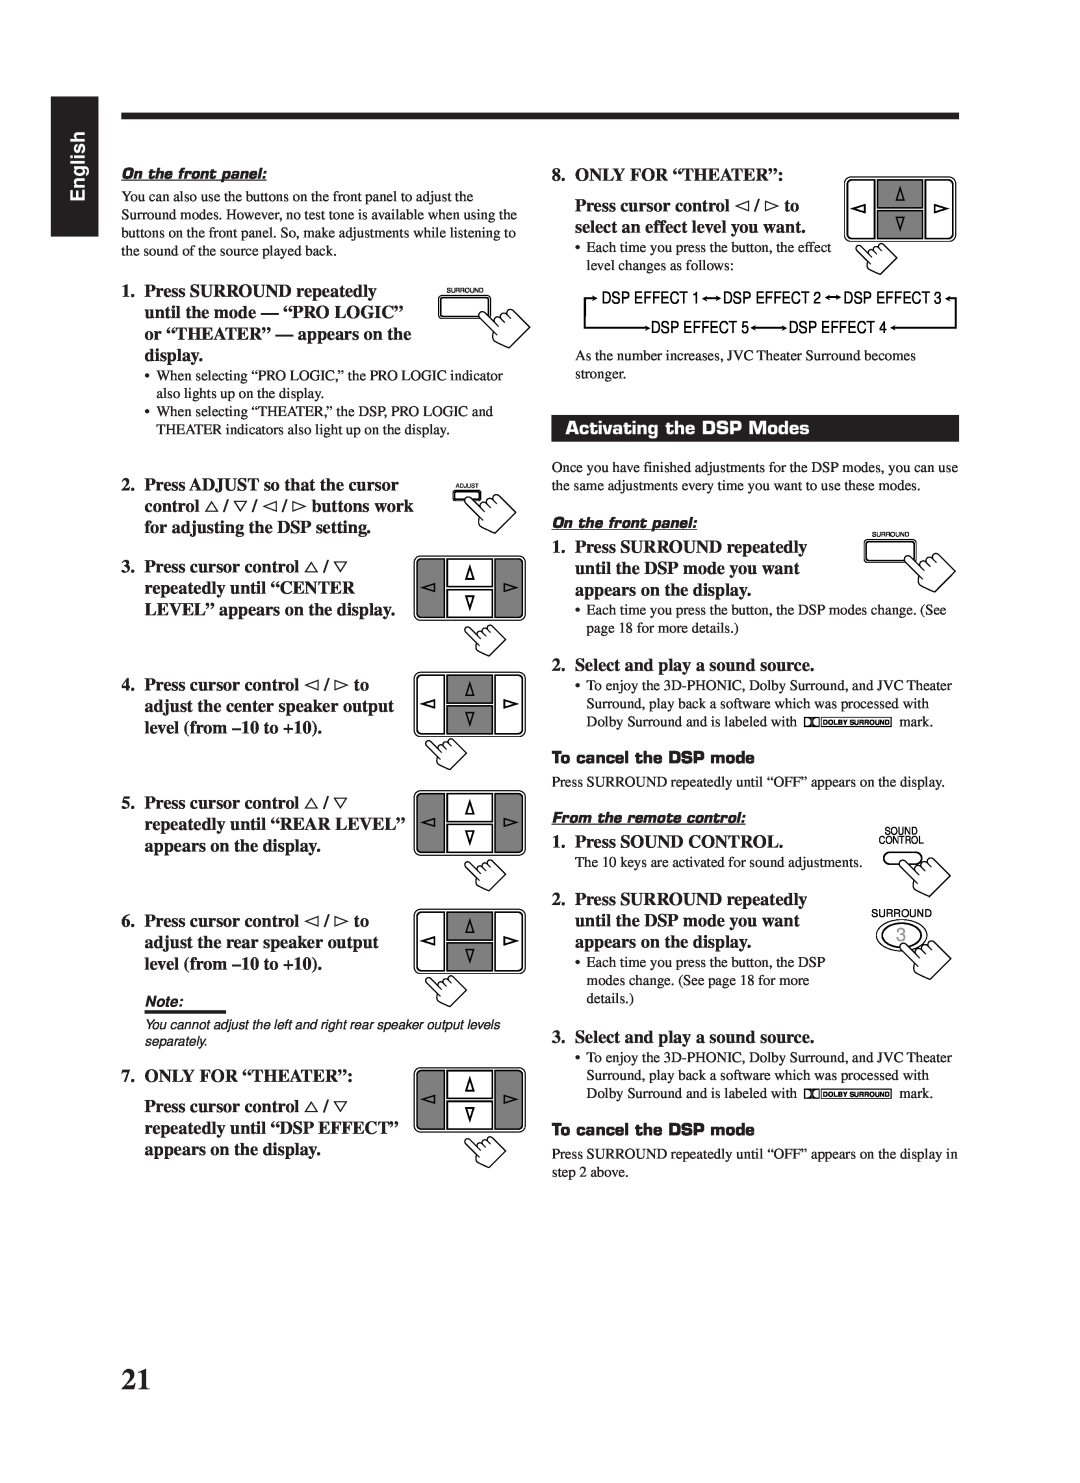 JVC RX-668RBK manual Activating the DSP Modes, English 